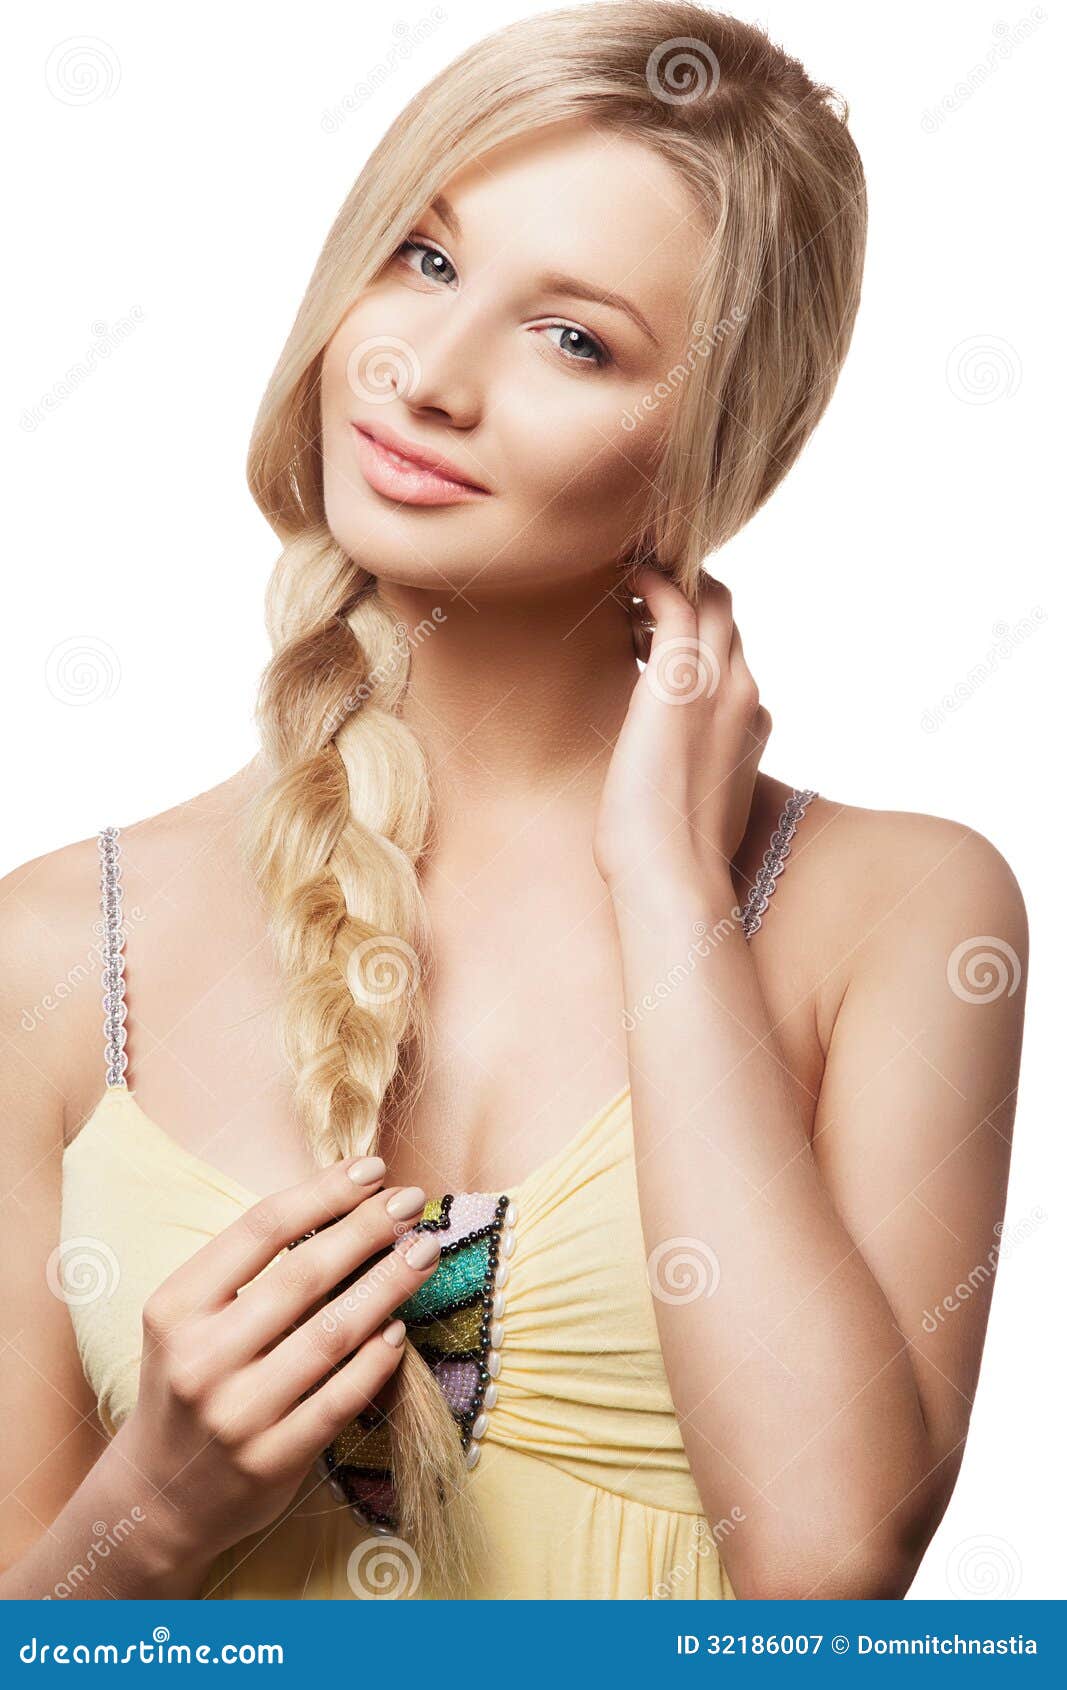 woman text blonde